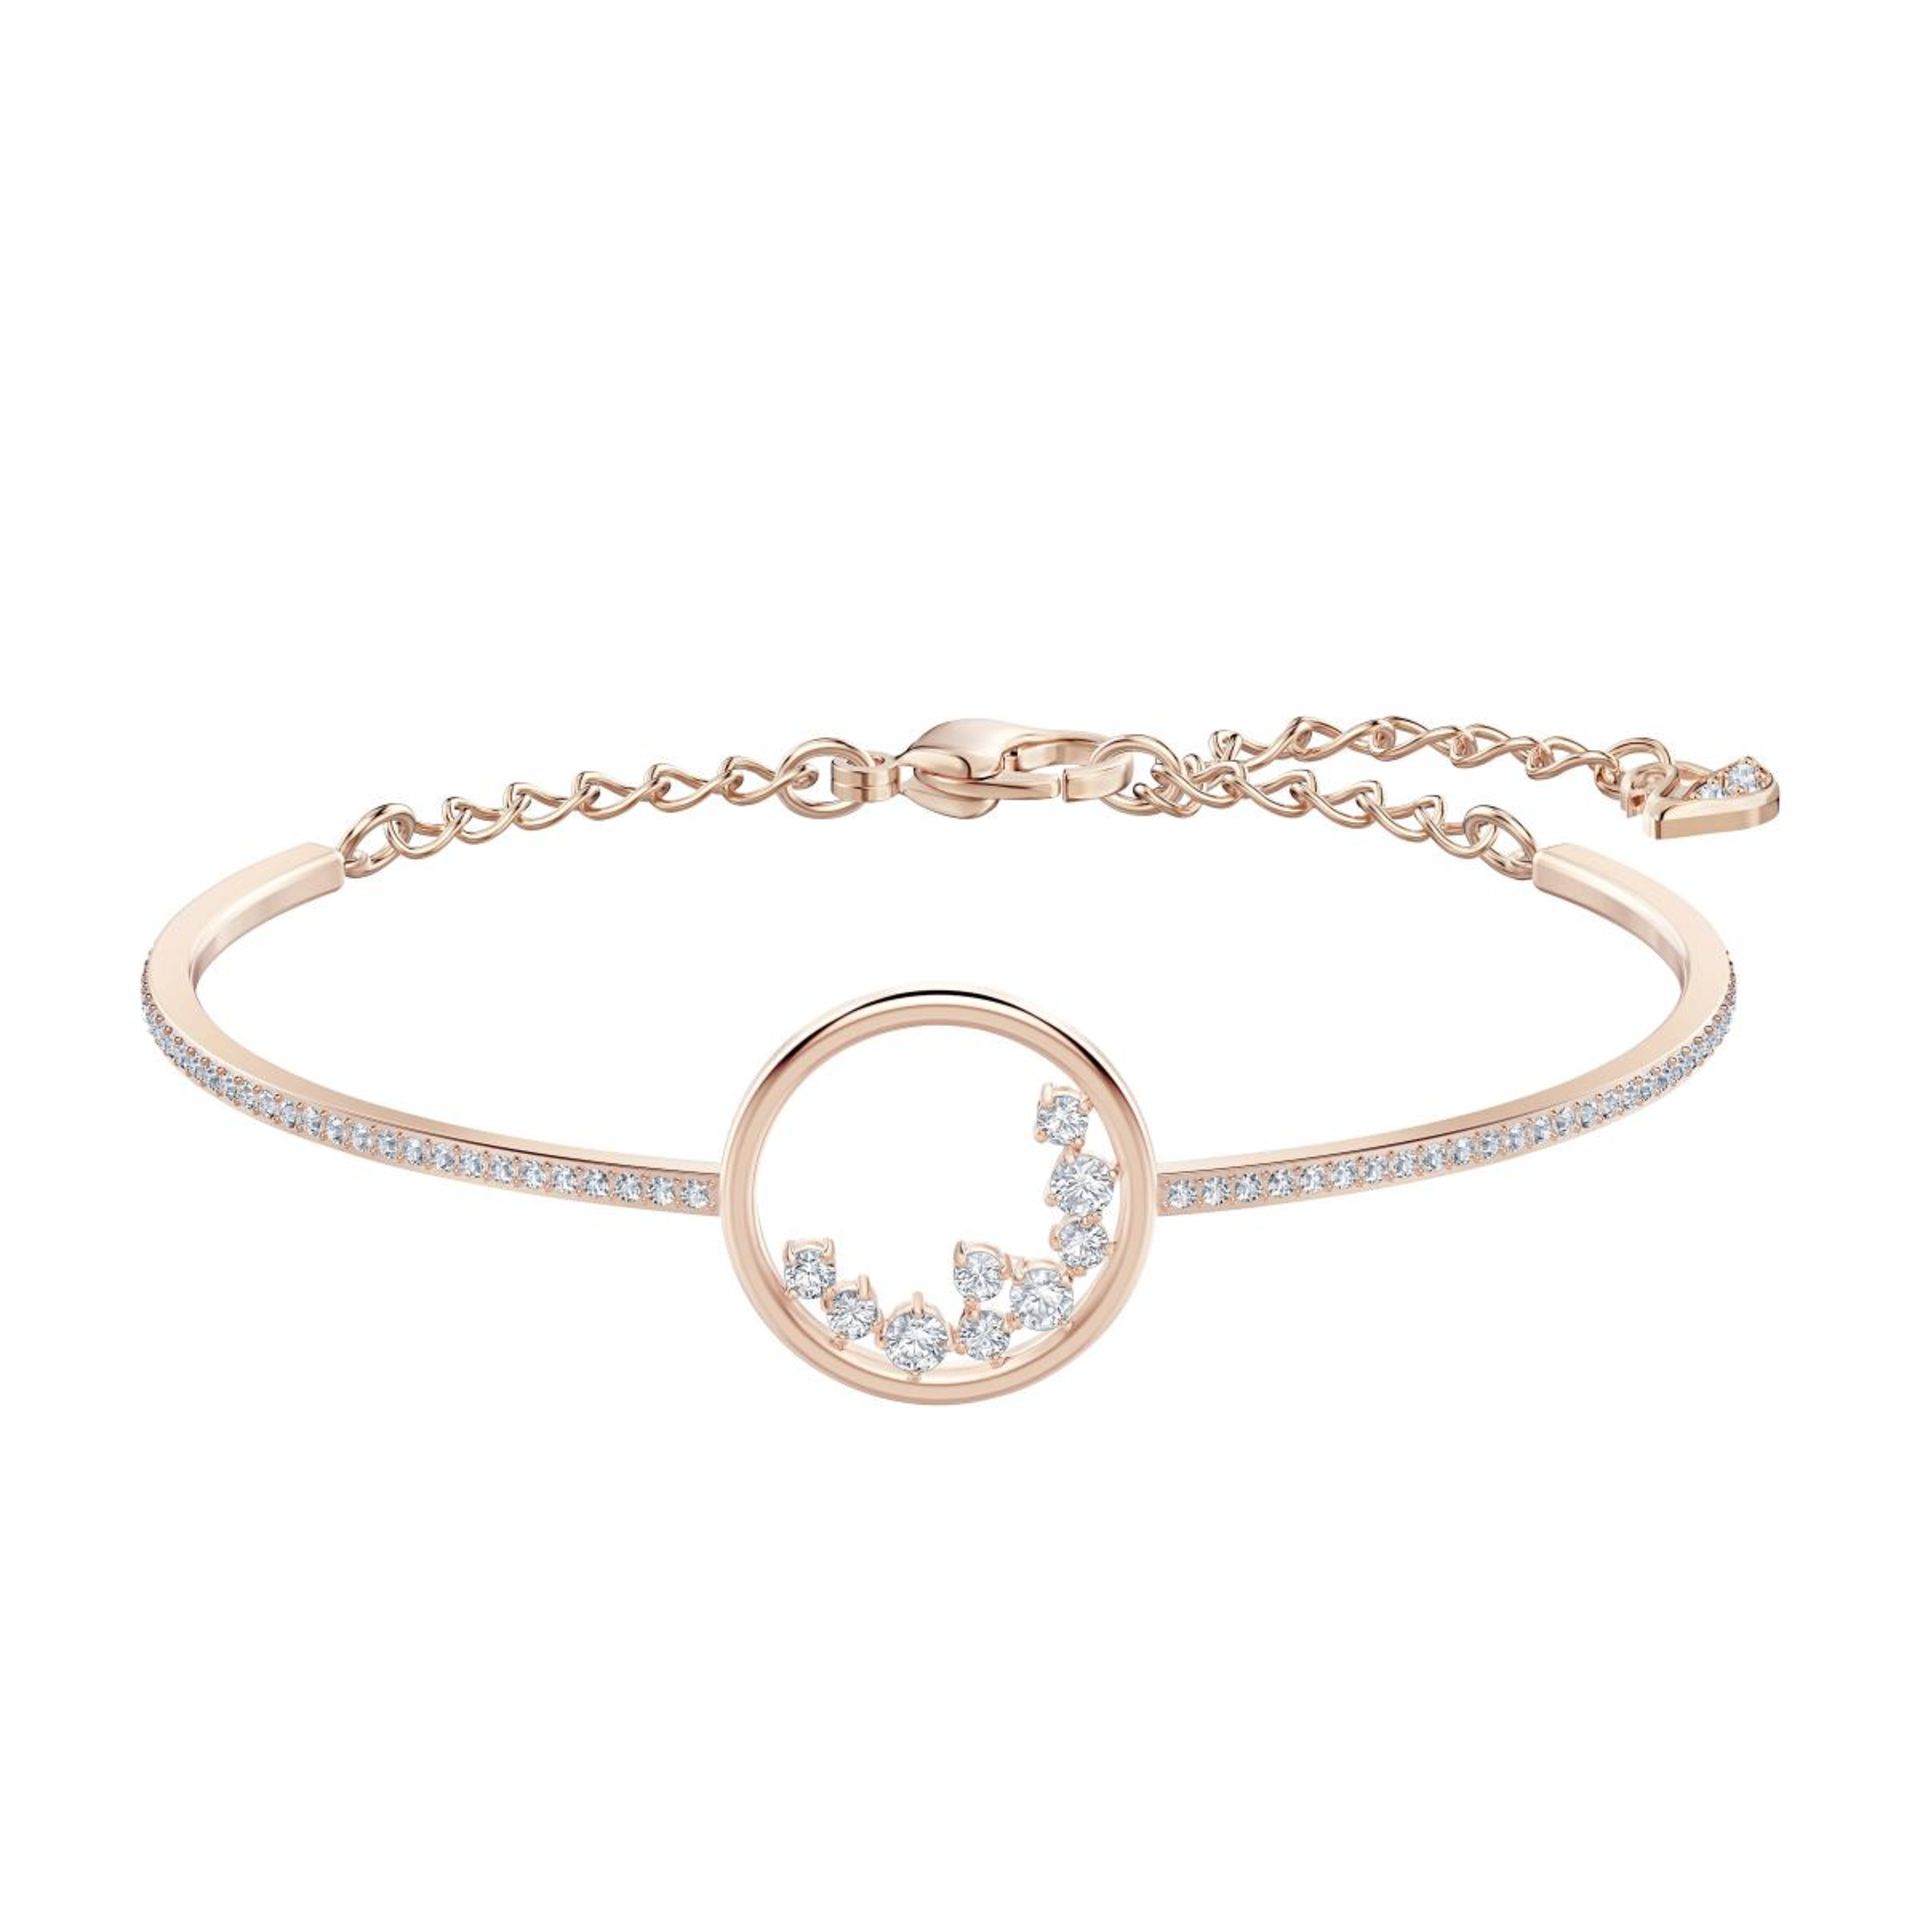 Swarovski 5493393 Crystal and rose gold Plated bangle, new in presentation box and gift bag.